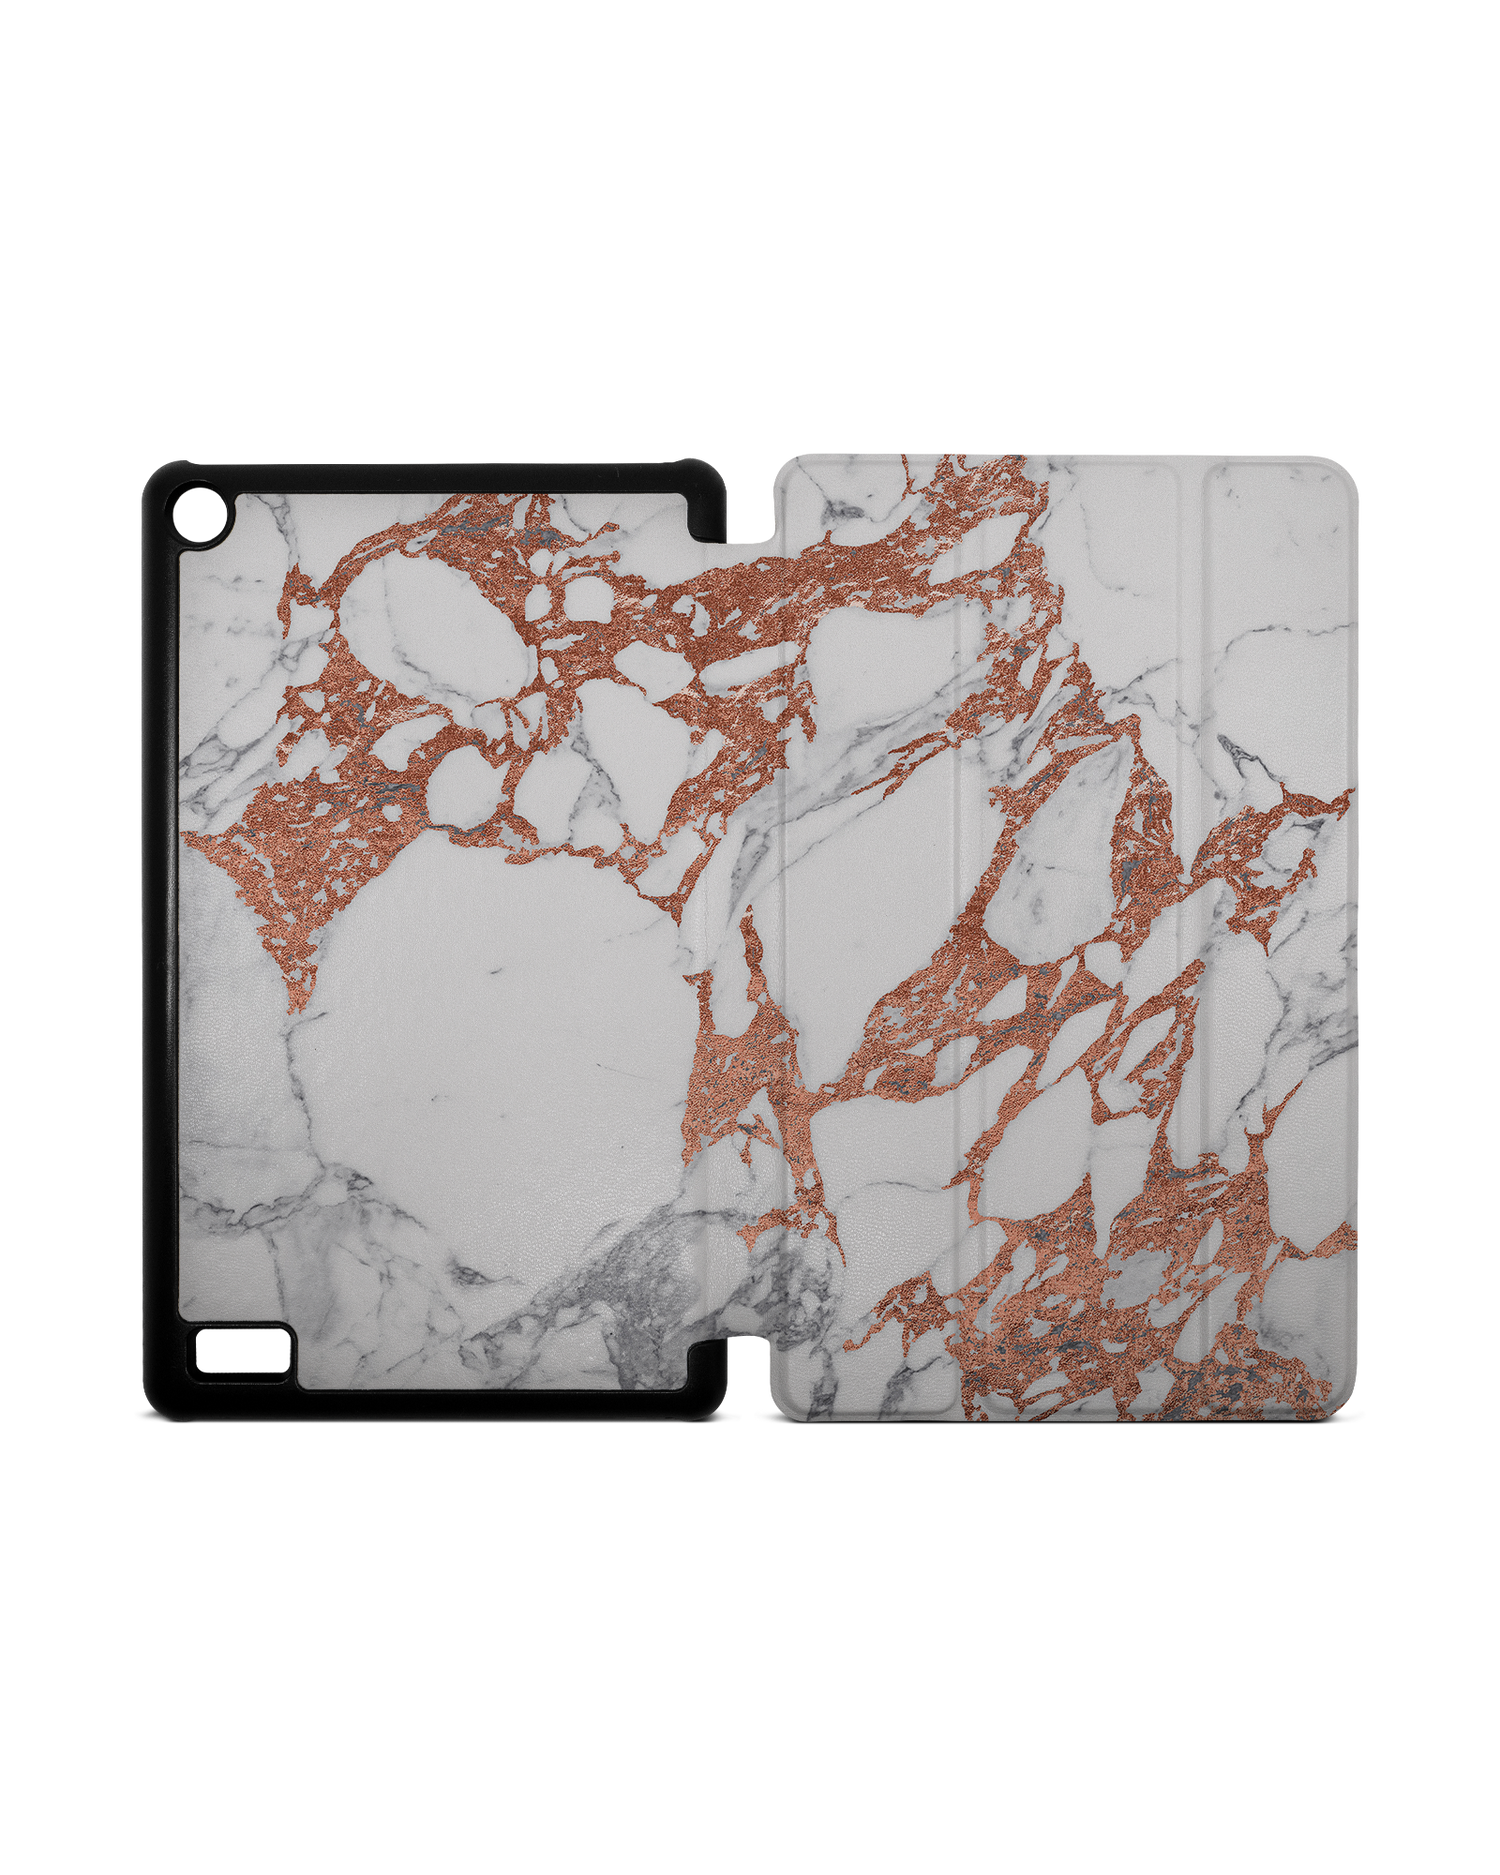 Marble Mix Tablet Smart Case for Amazon Fire 7: Opened